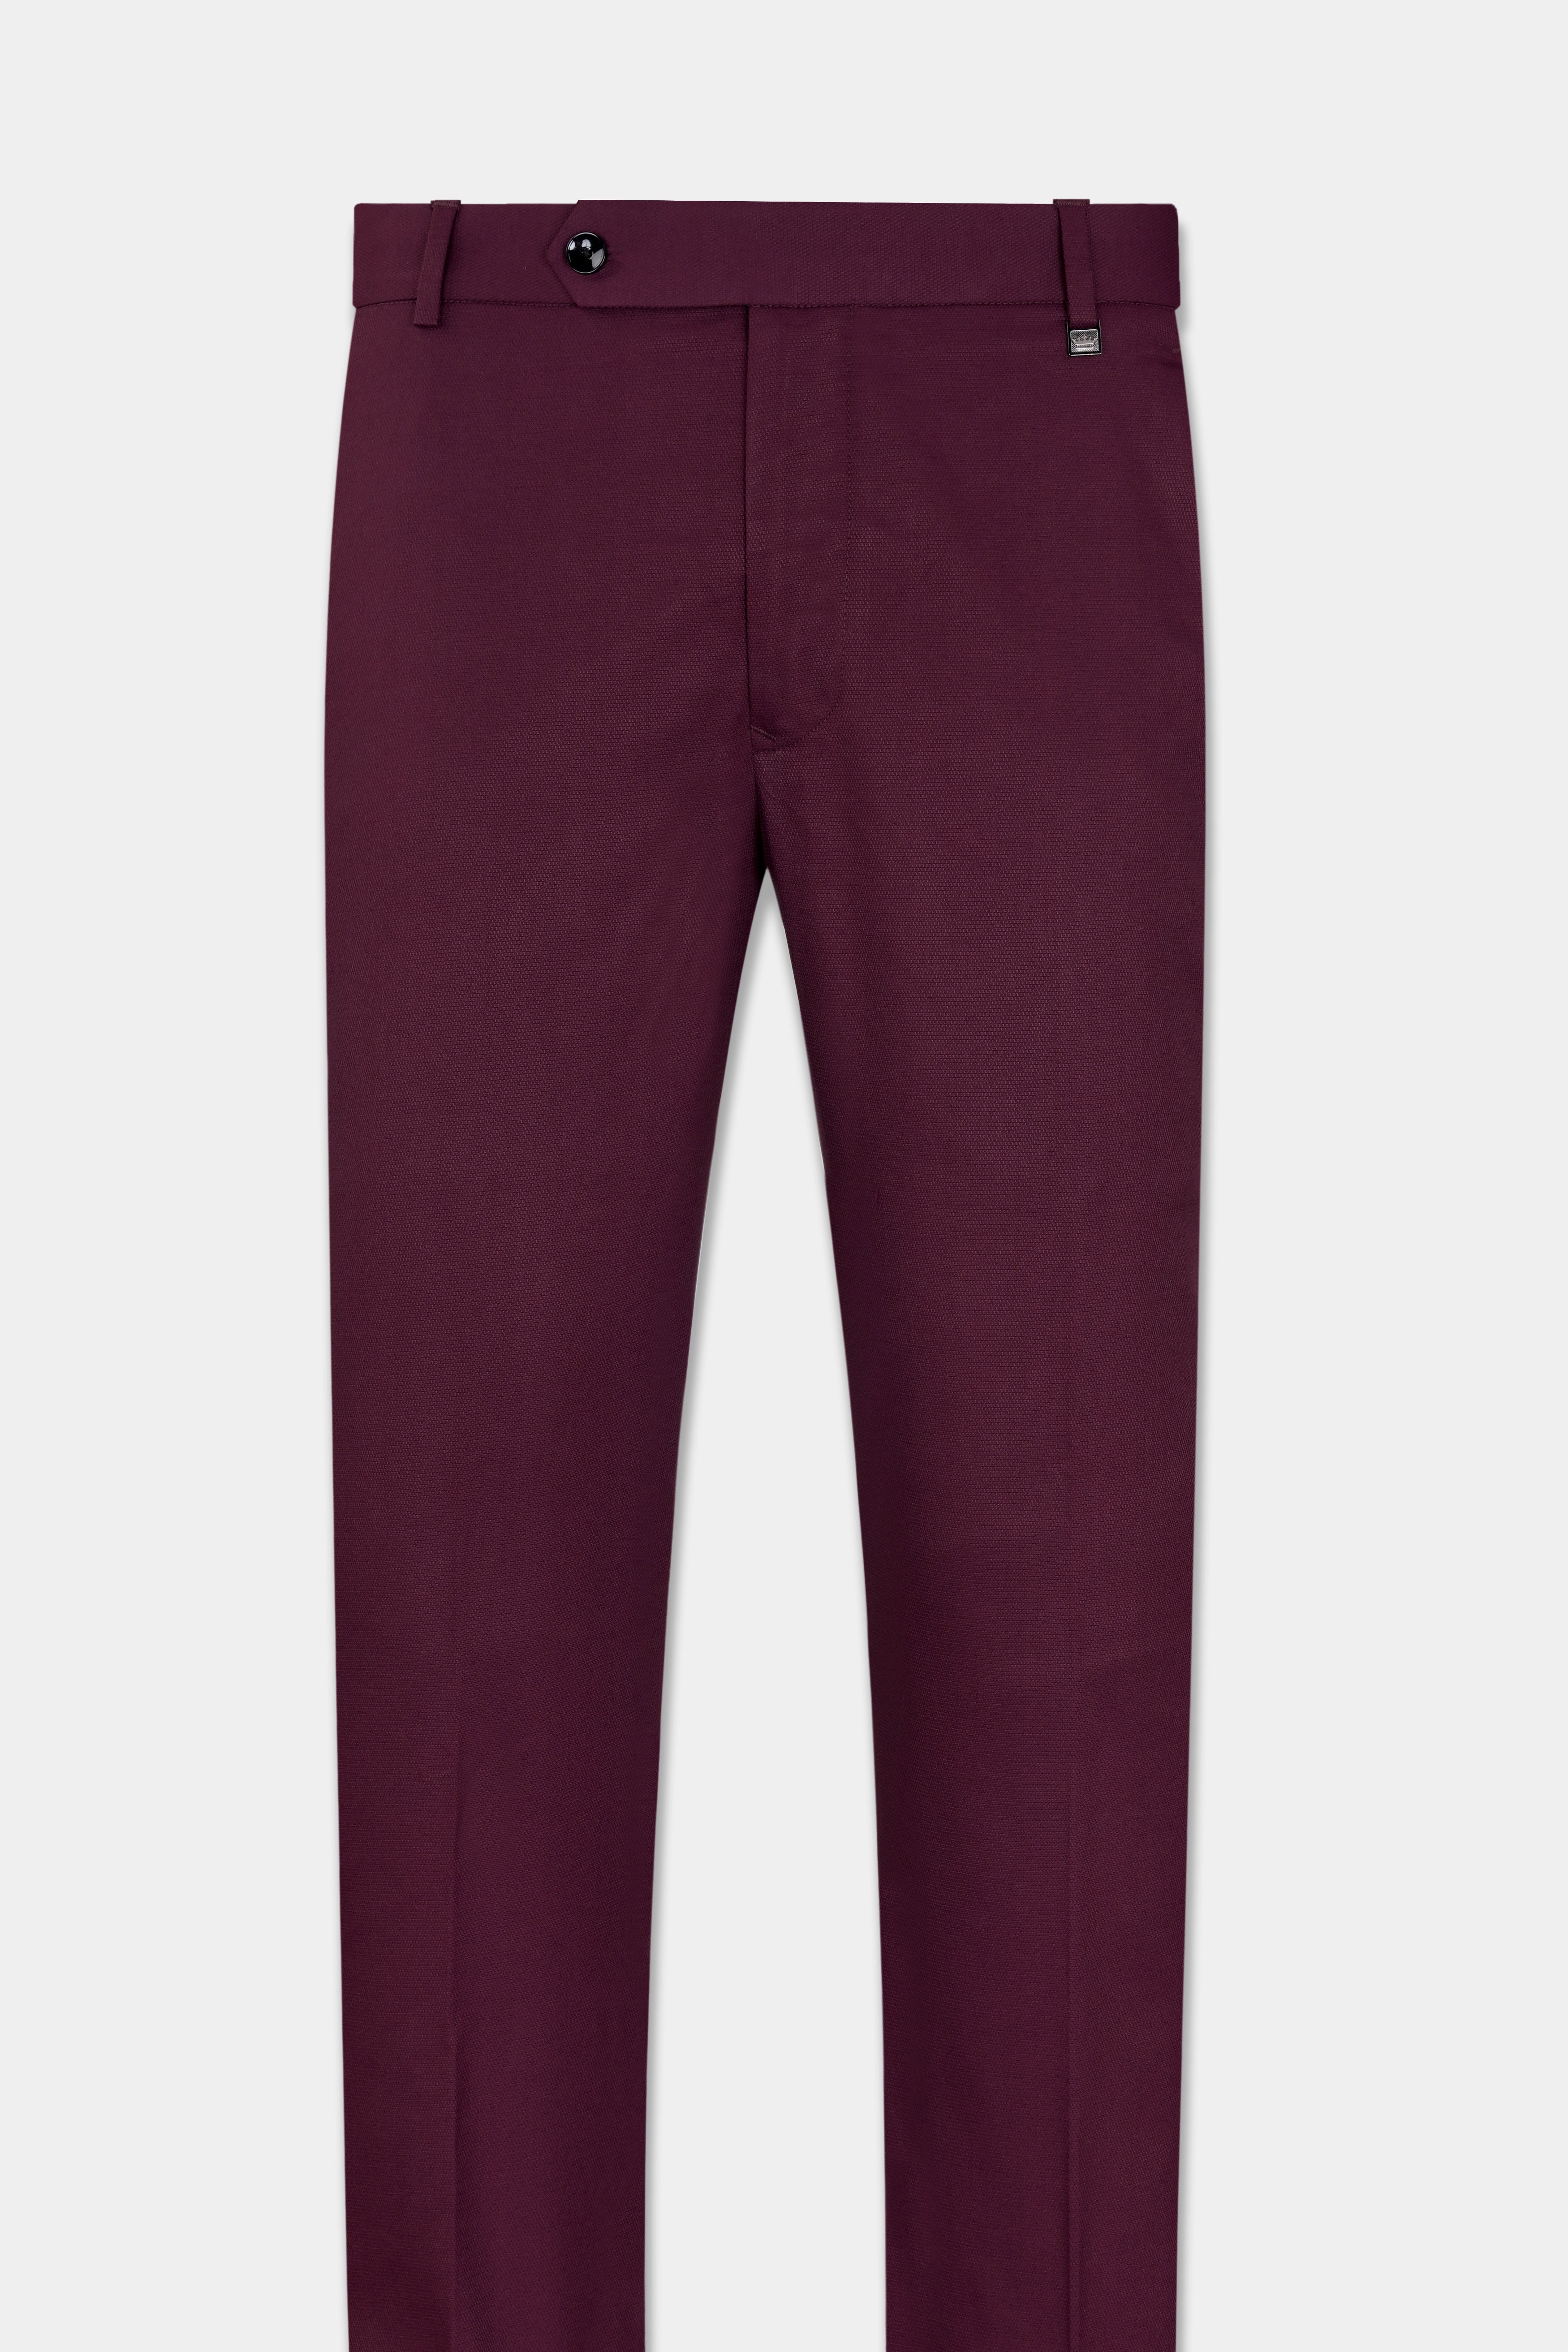 Magenta Maroon Wool Rich Stretchable Pant T2949-SW-28, T2949-SW-30, T2949-SW-32, T2949-SW-34, T2949-SW-36, T2949-SW-38, T2949-SW-40, T2949-SW-42, T2949-SW-44